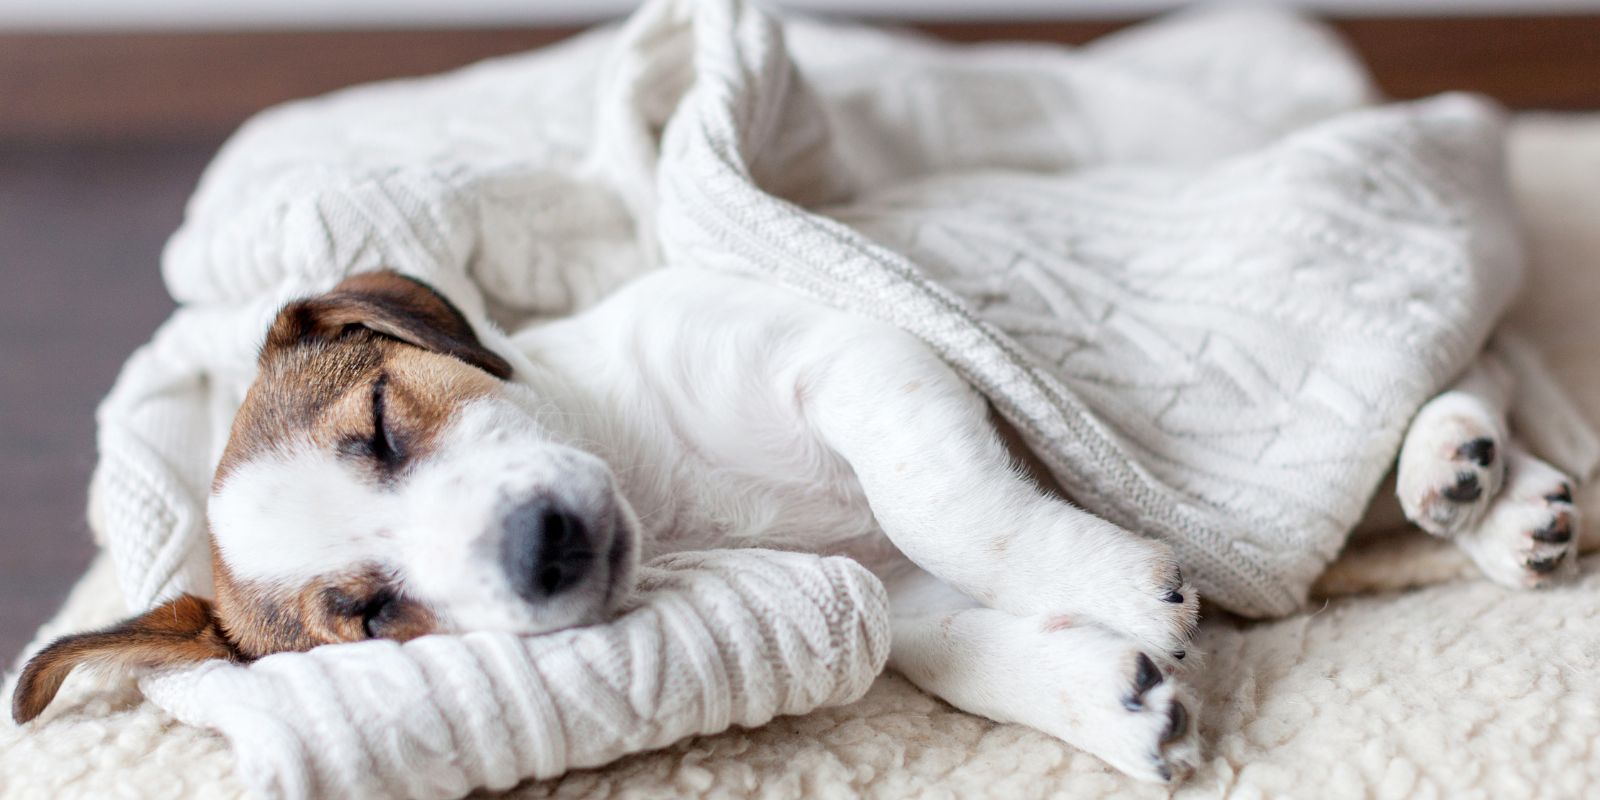 Pet friendly hotels orlando, Jack Russell terrior sleeping while wrapped in a white fluffy blanket